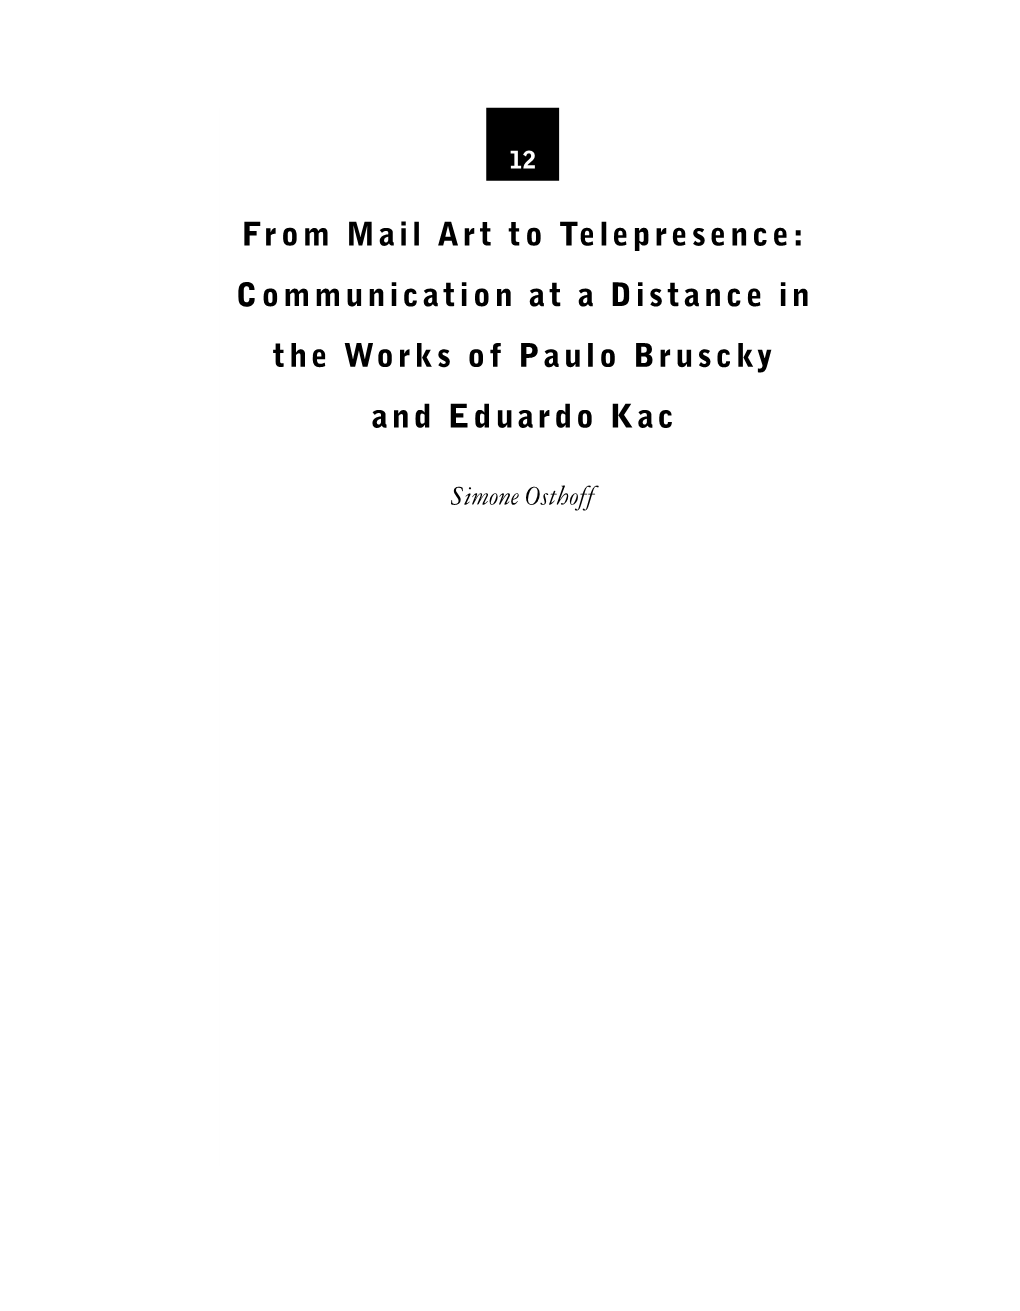 From Mail Art to Telepresence: Communication at a Distance in the Works of Paulo Bruscky and Eduardo Kac